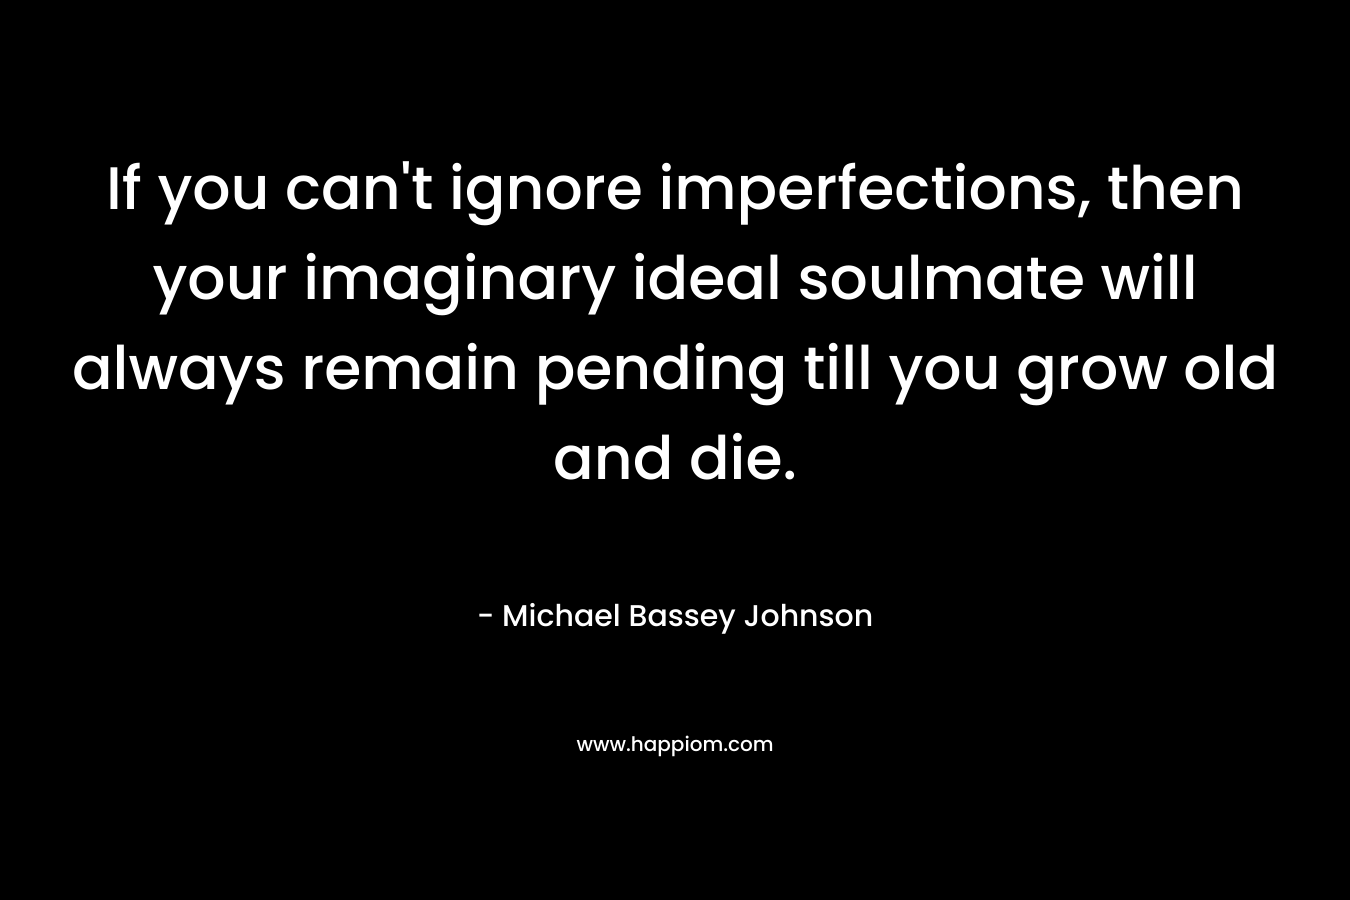 If you can’t ignore imperfections, then your imaginary ideal soulmate will always remain pending till you grow old and die. – Michael Bassey Johnson